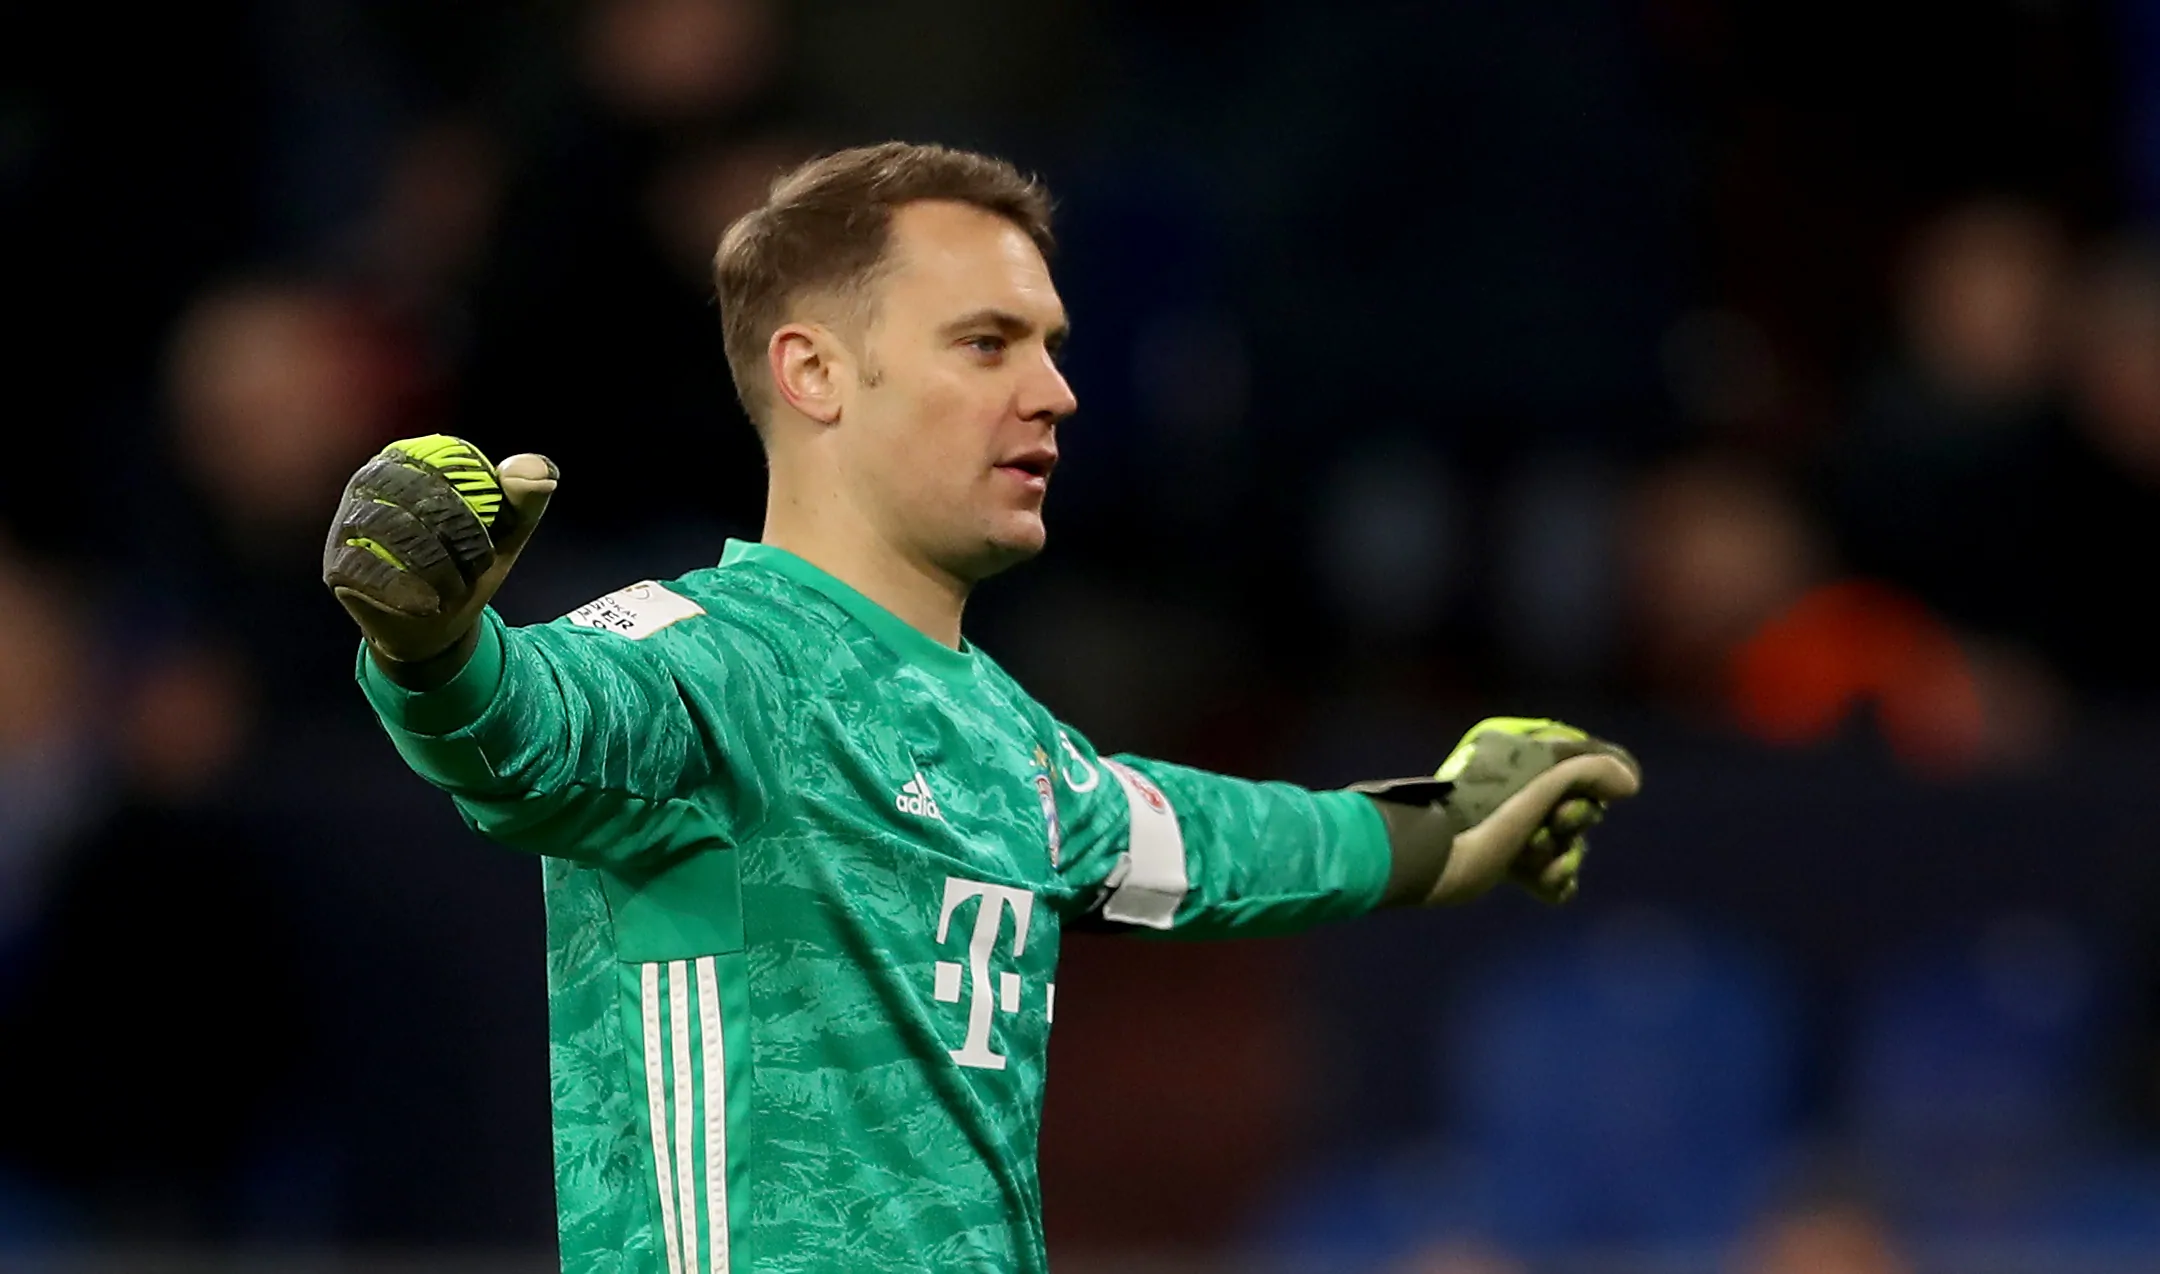 Bayern Munich Goalkeeper Manuel Neuer Has Is One Of The Players With Most UCL Wins